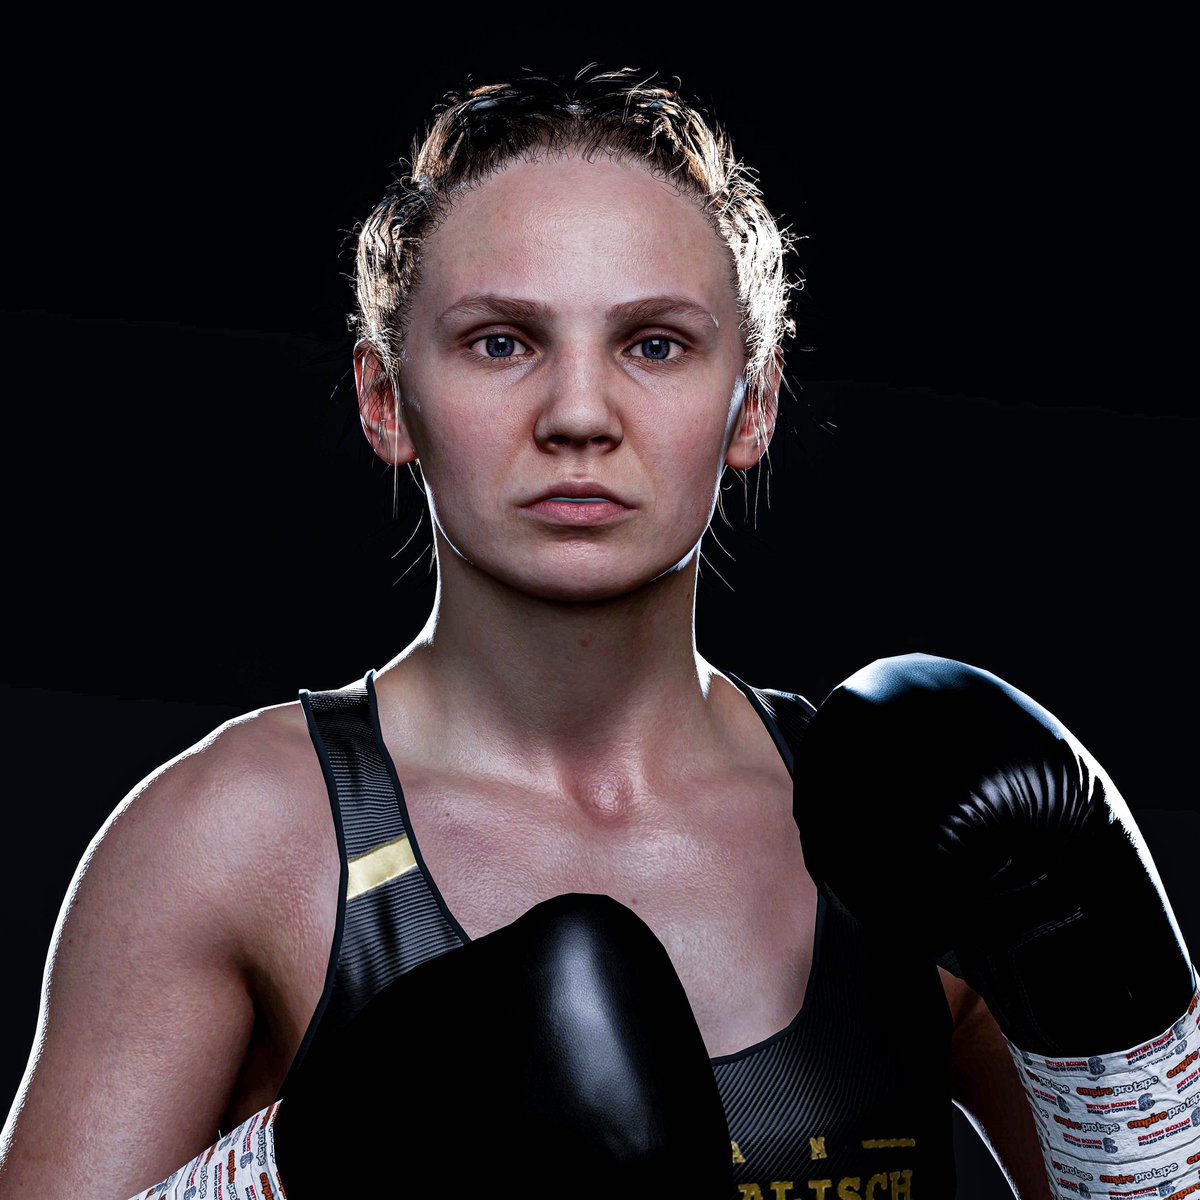 Excited to share that Sophie Alisch will be available on day 1 of early access in Undisputed! #BecomeUndisputed 🥊🇩🇪